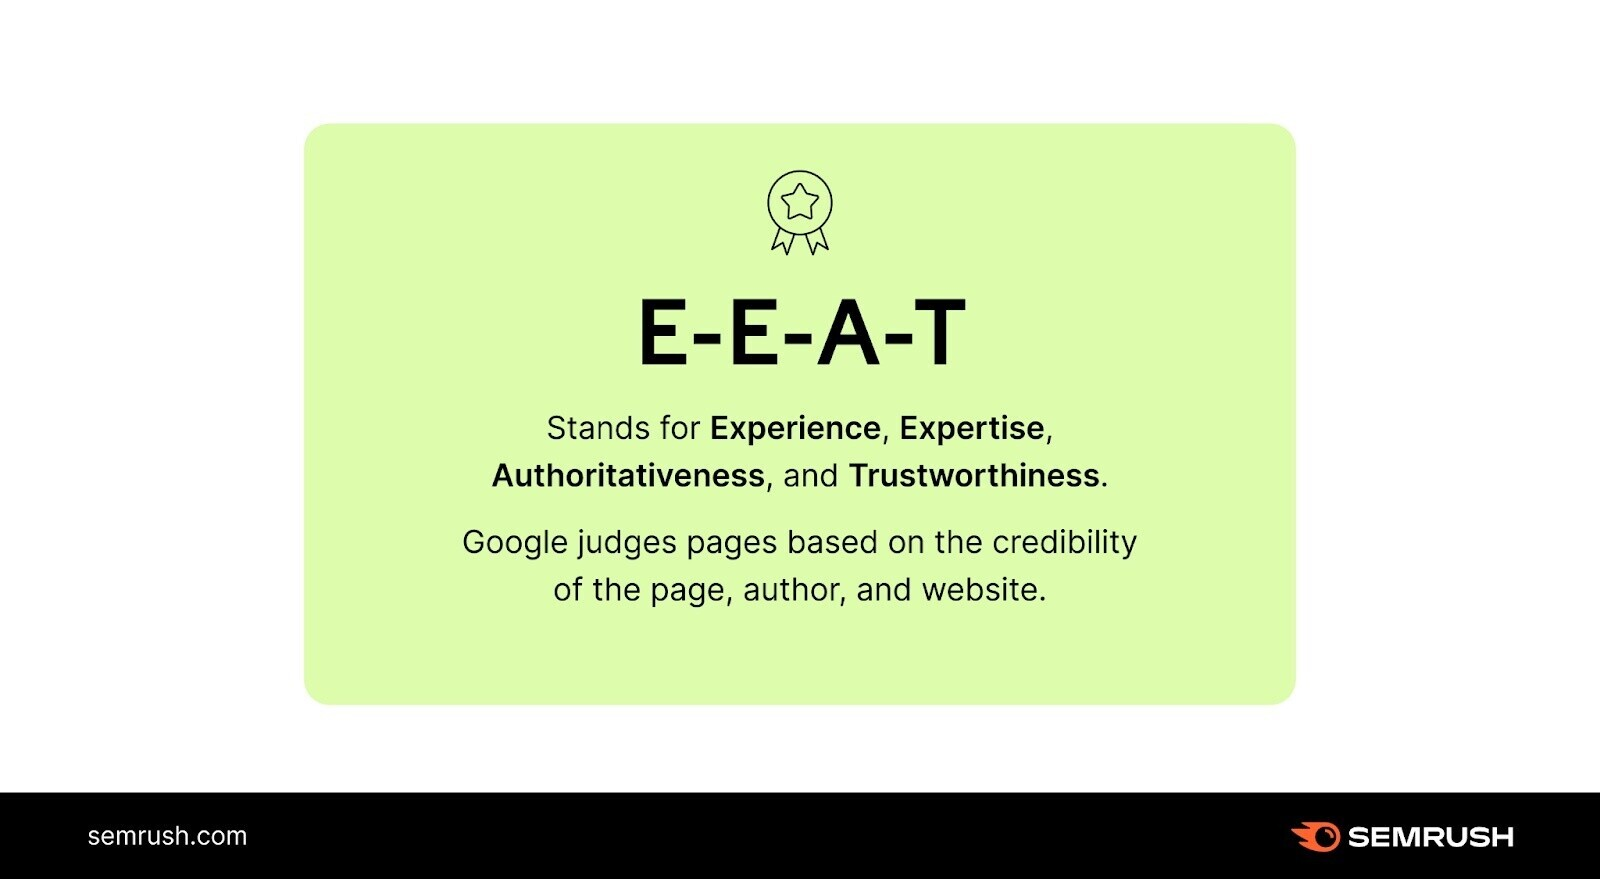 E-E-A-T: Google judges pages based on the credibility of the page, author, and website